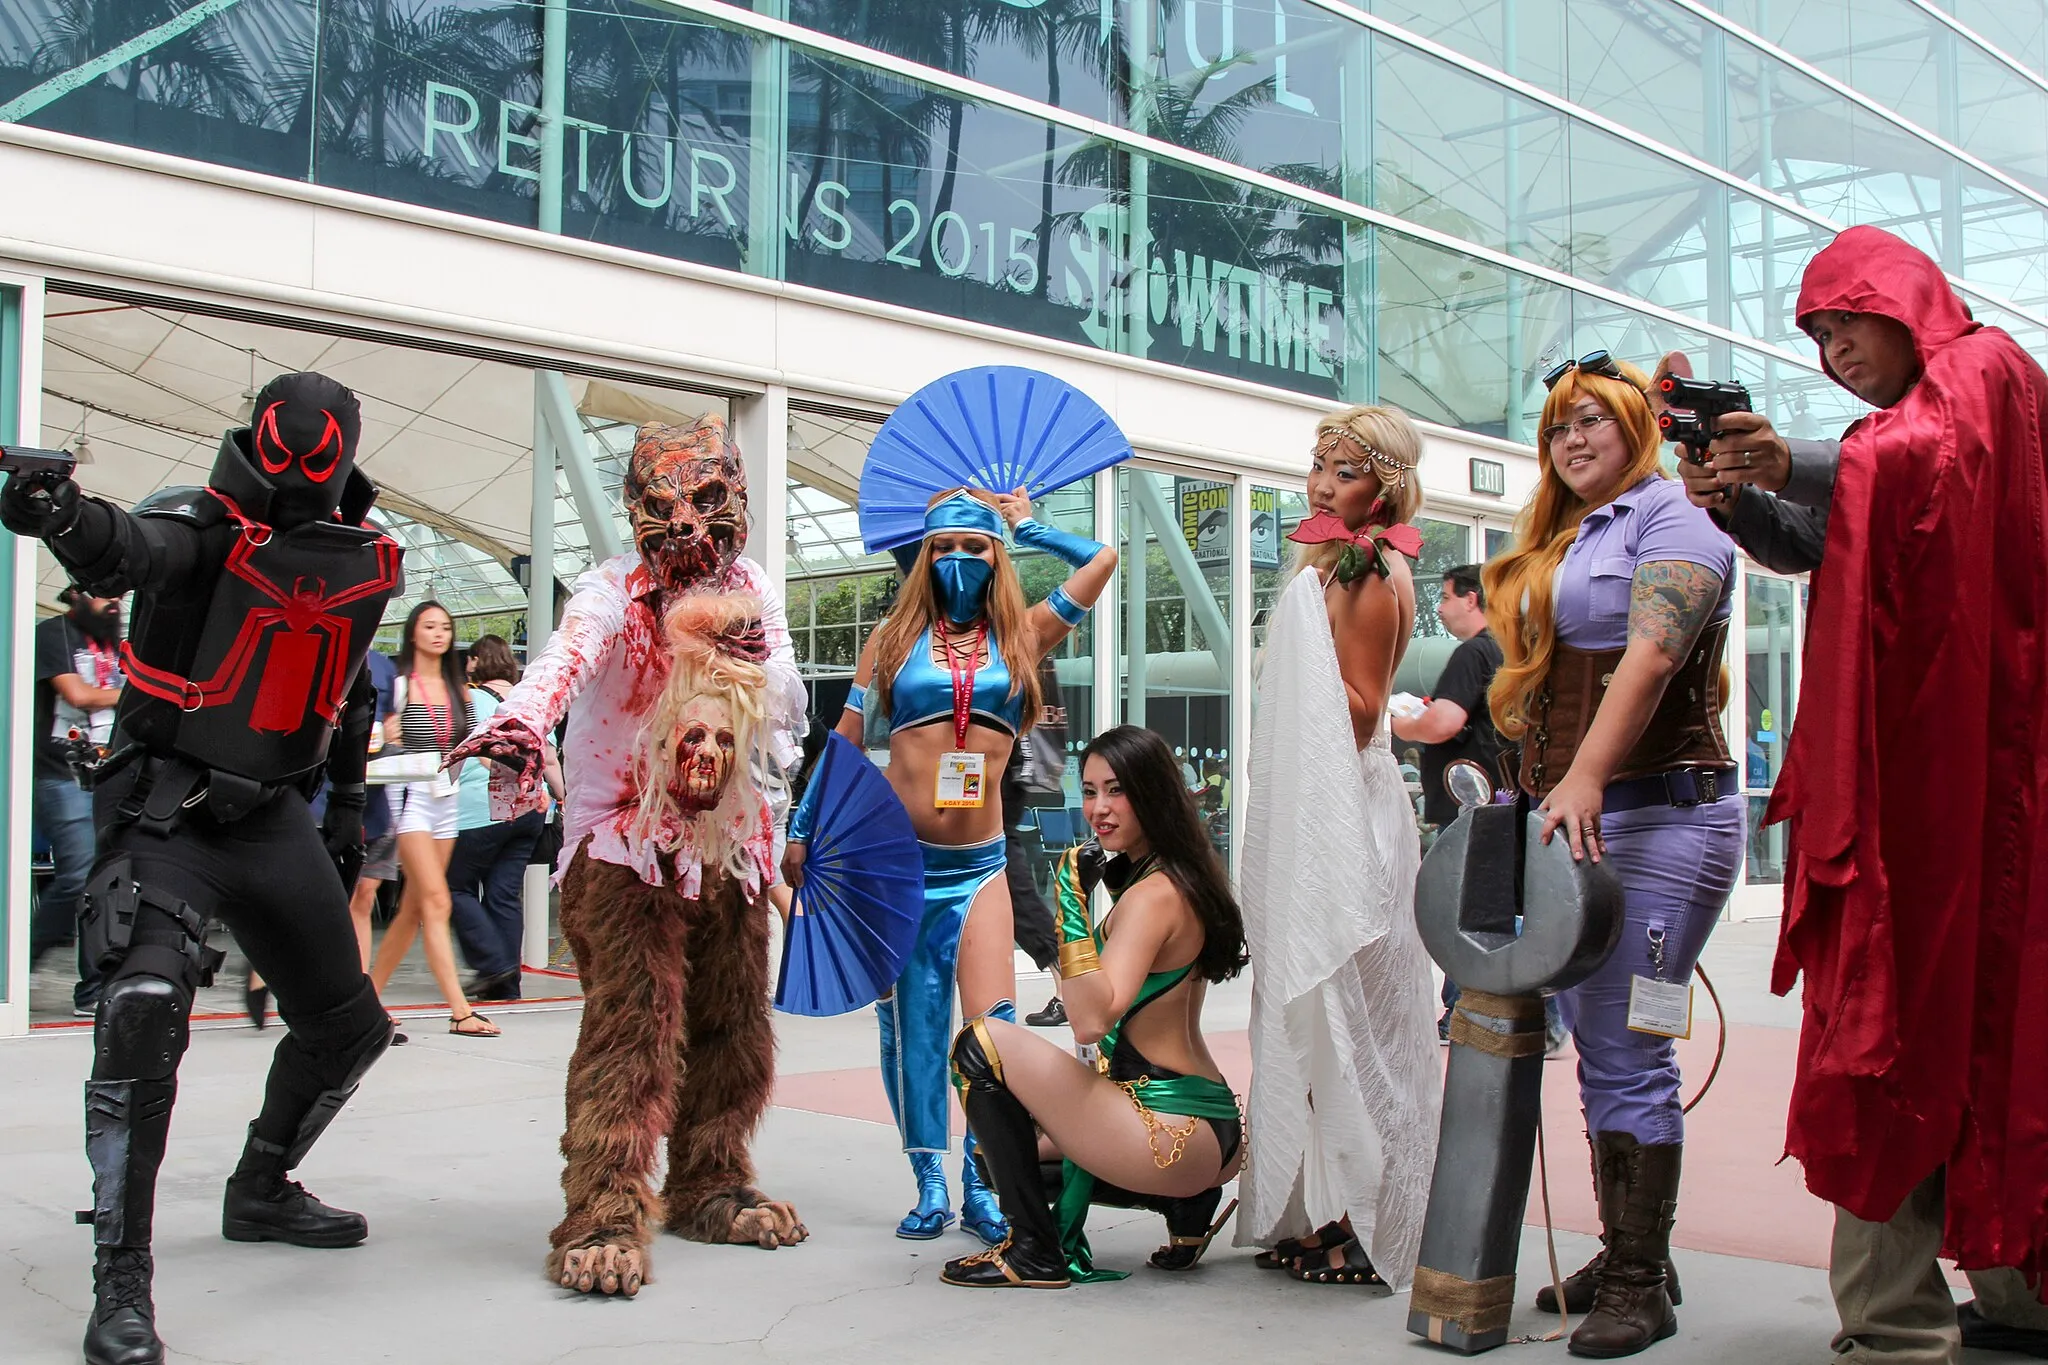 Photo showing: Cosplay at San Diego Comic Con 2014.  From left to right: Agent Venom (from Marvel Comics), [an unidentified character], Kitana (from Mortal Kombat), Jade (also from Mortal Kombat), [an unidentified character], Gadget Hackwrench (from Chip 'n Dale Rescue Rangers), and The Hood (from Marvel Comics).